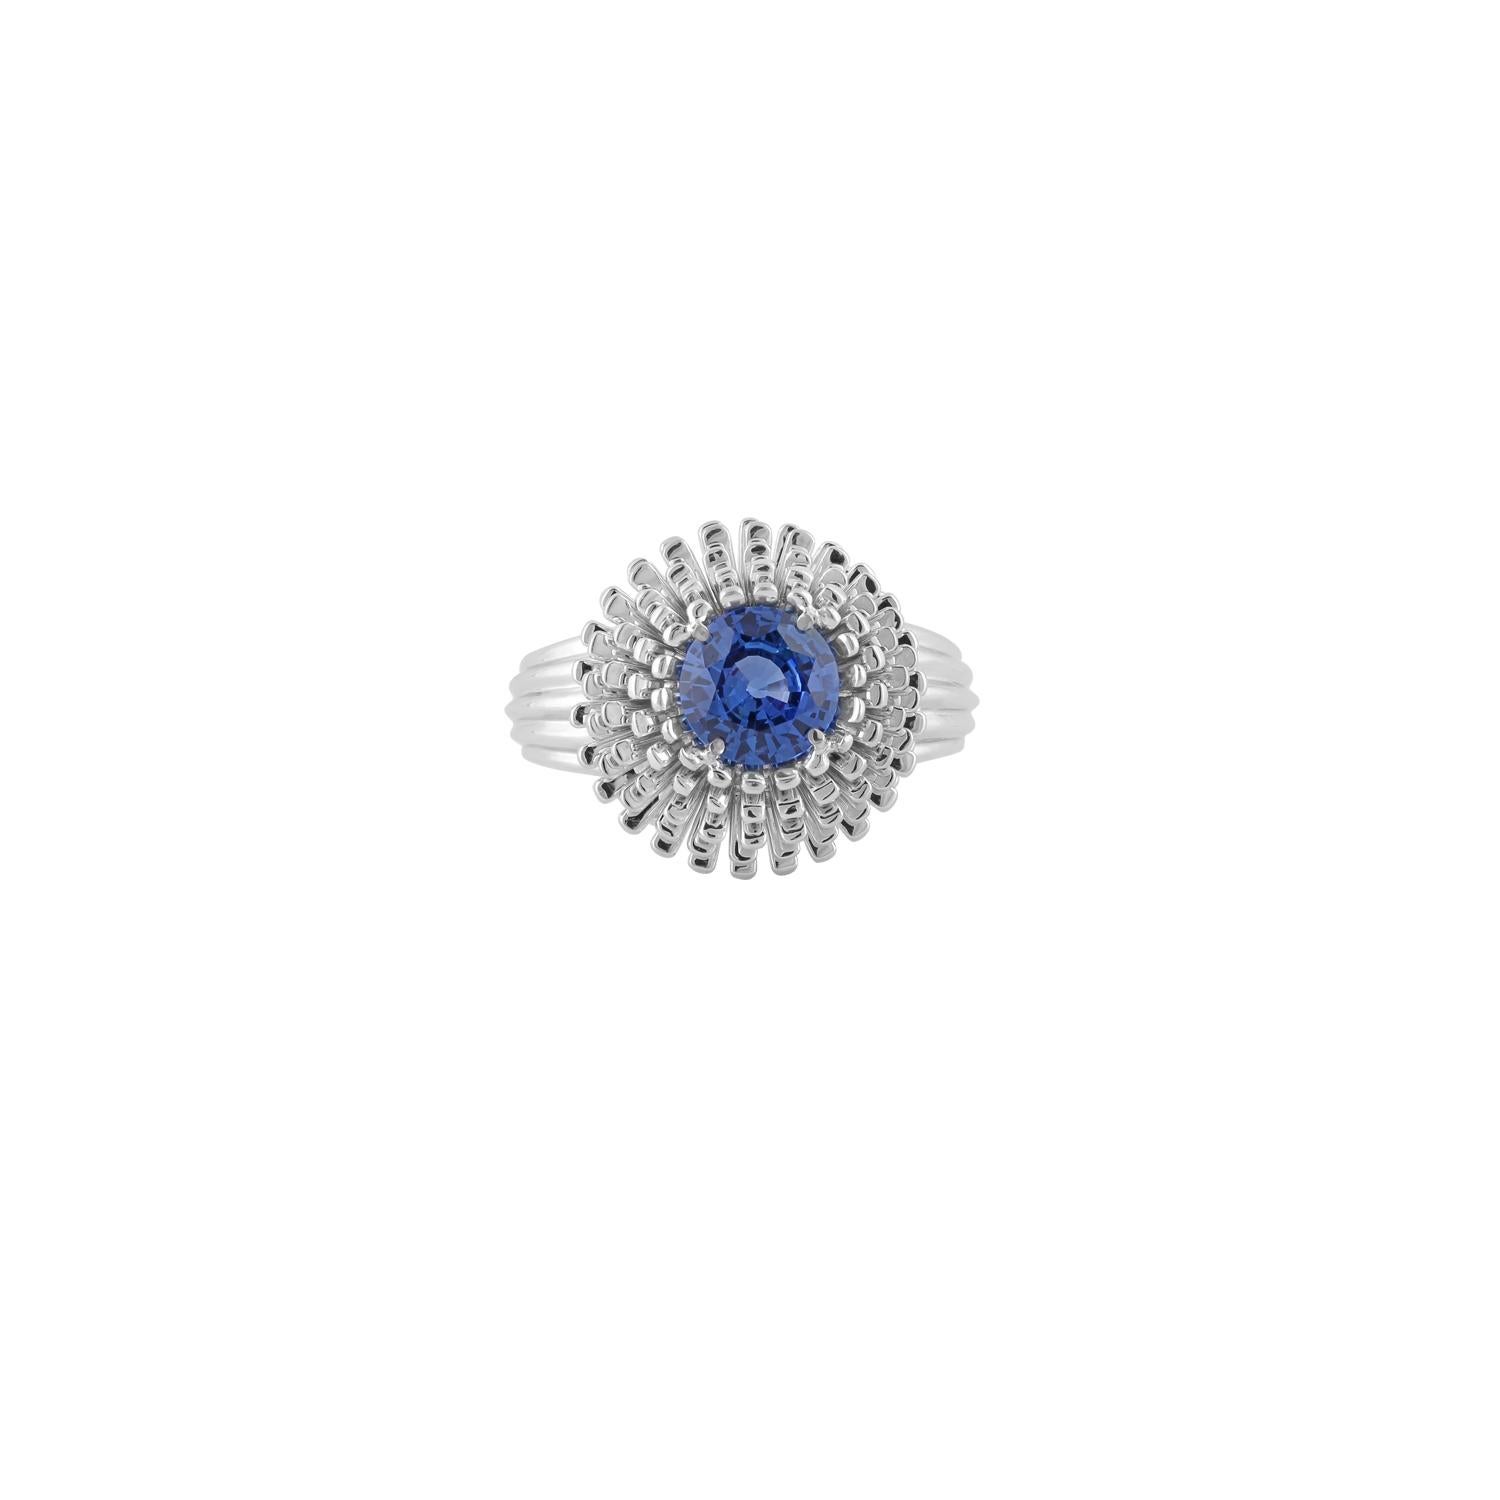 Magnificent Blue Sapphire Ring


Blue Sapphire - 0.57 Carats

18KT White

Custom Services
Resizing is available.
Request Customization

